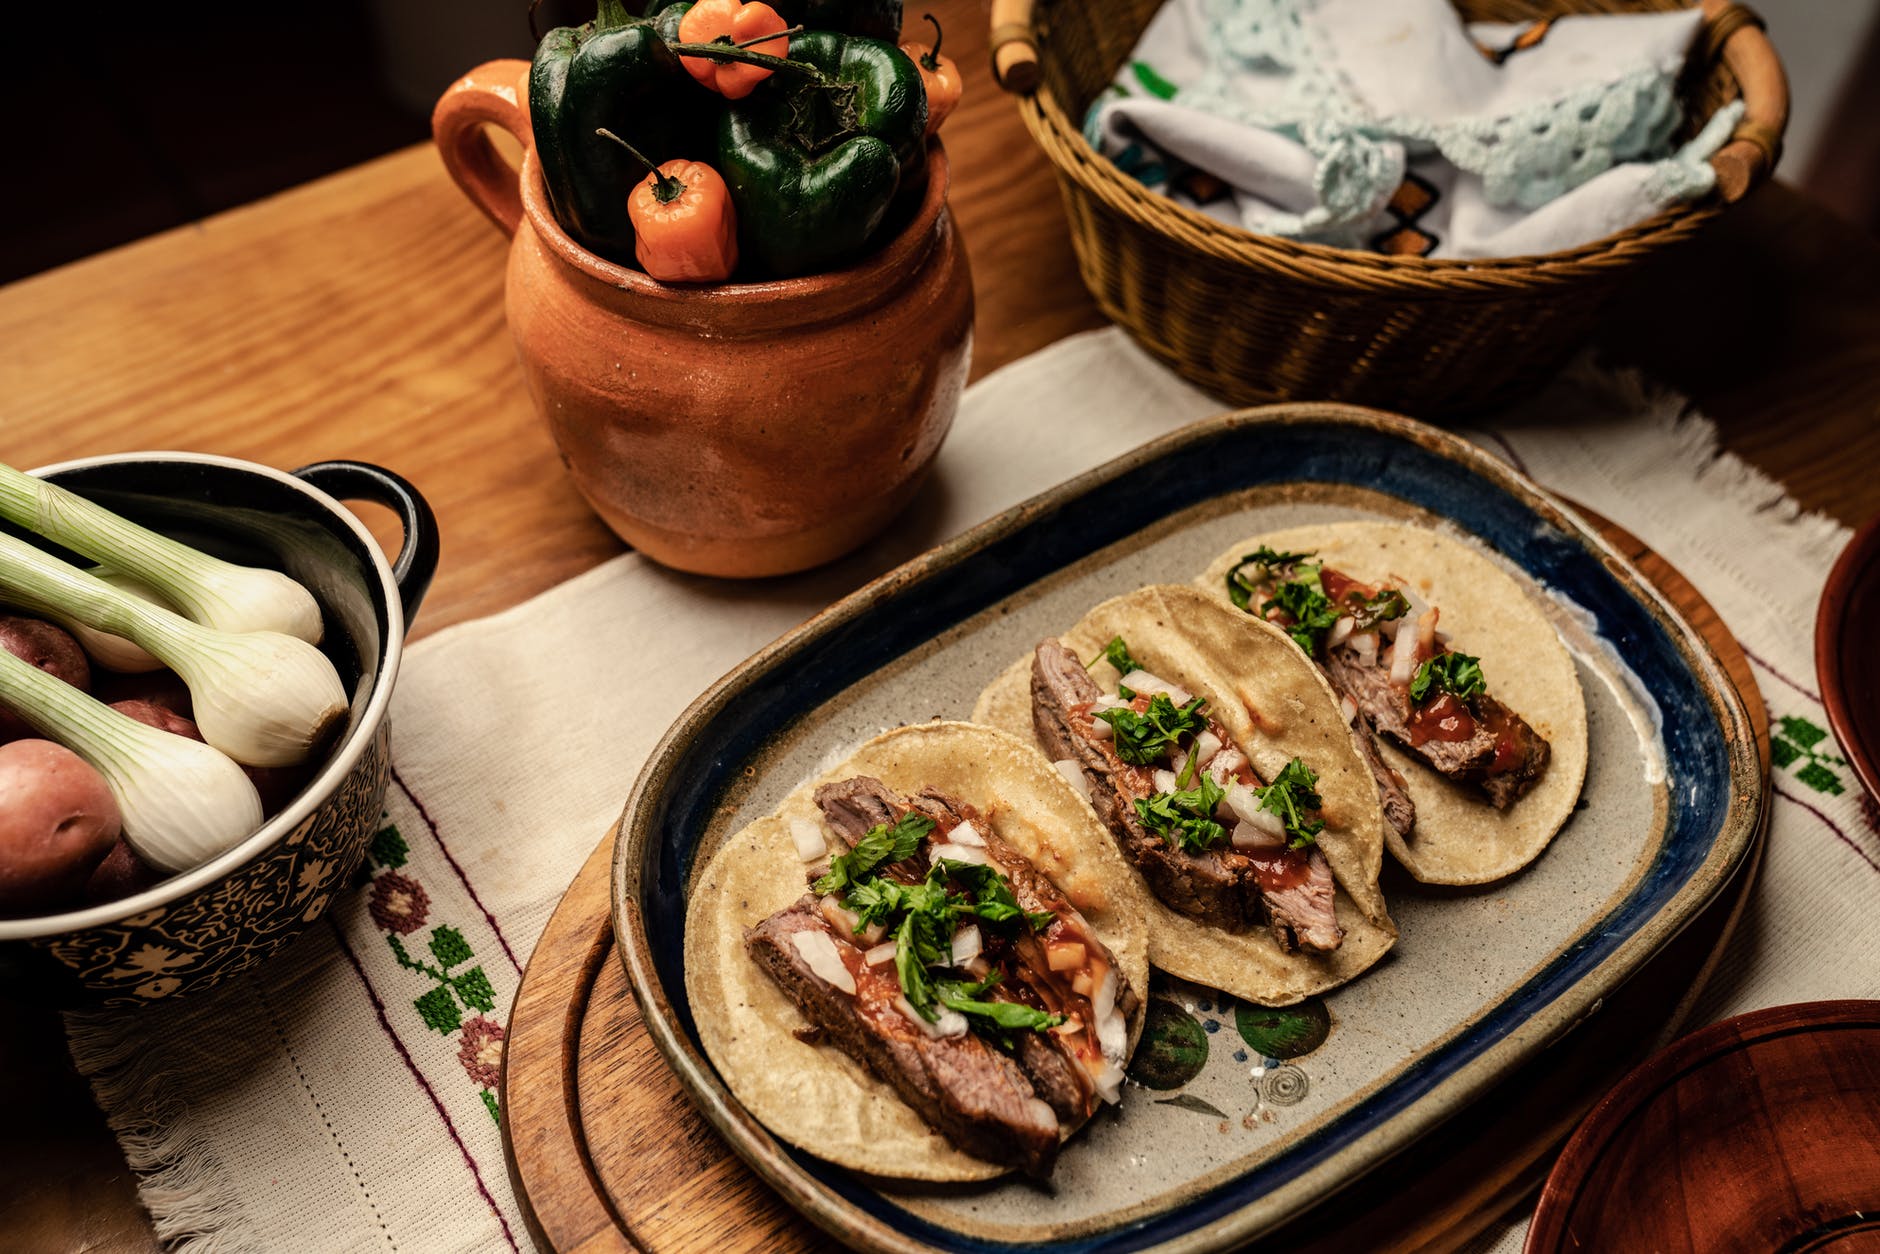 Mexican tacos can be found in Sydney's Chupacabra restaurant